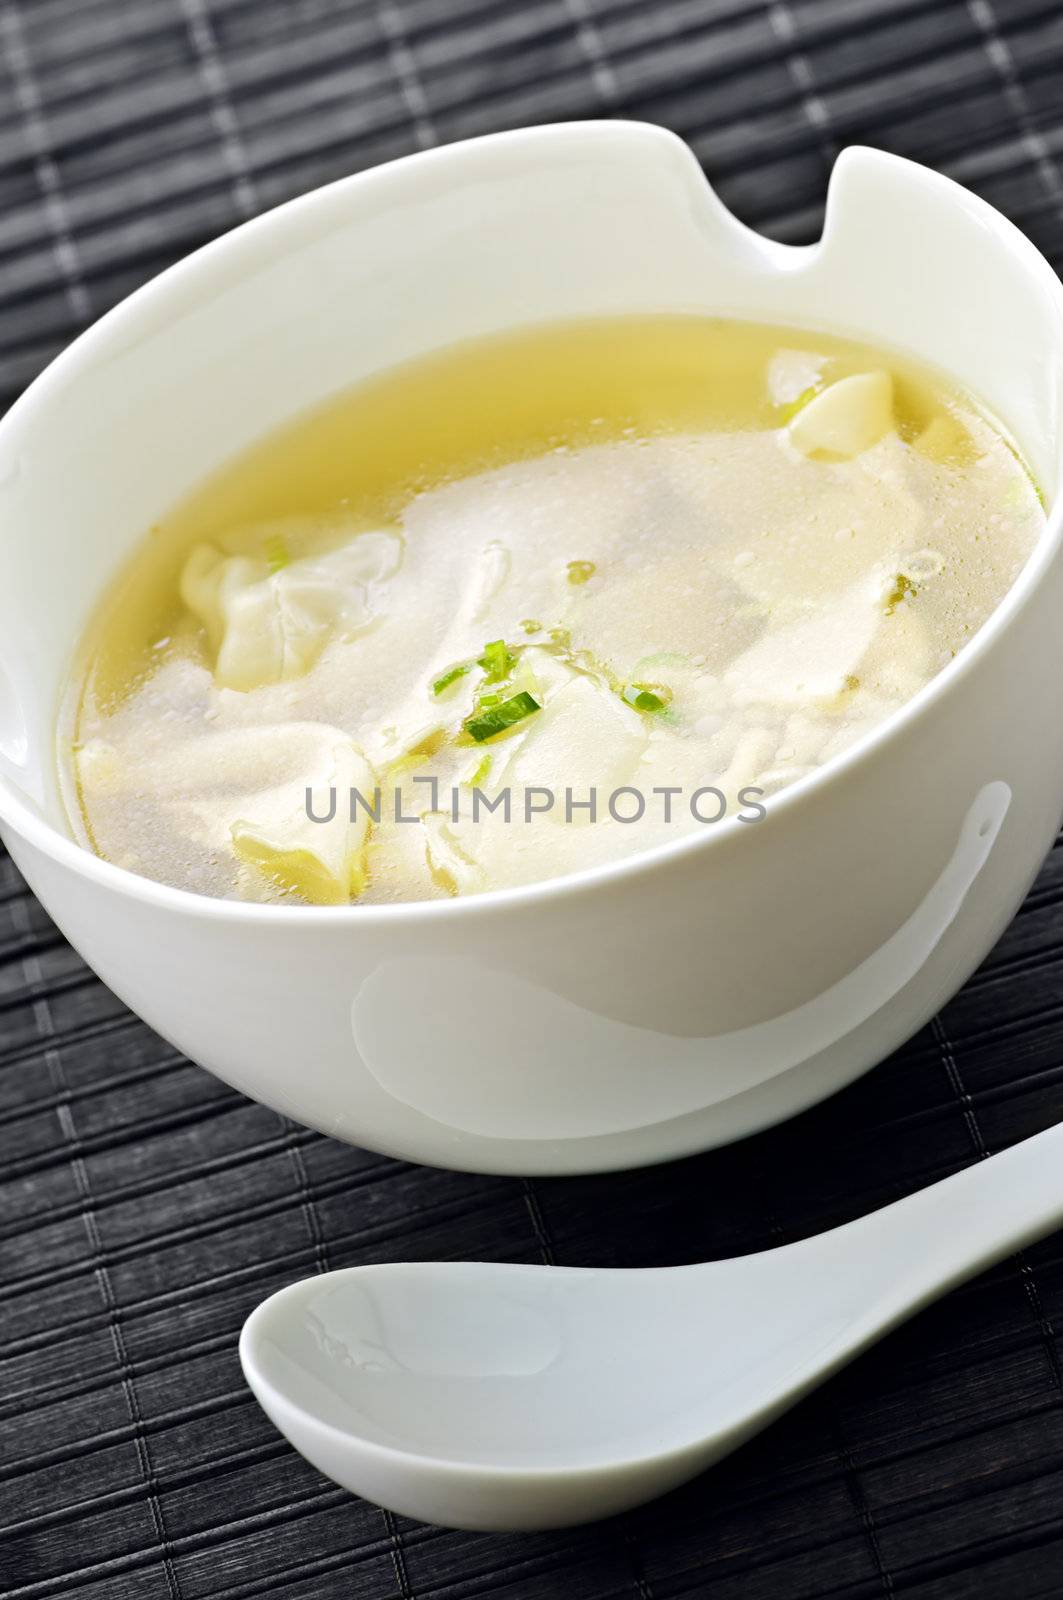 Wonton soup in white bowl with spoon